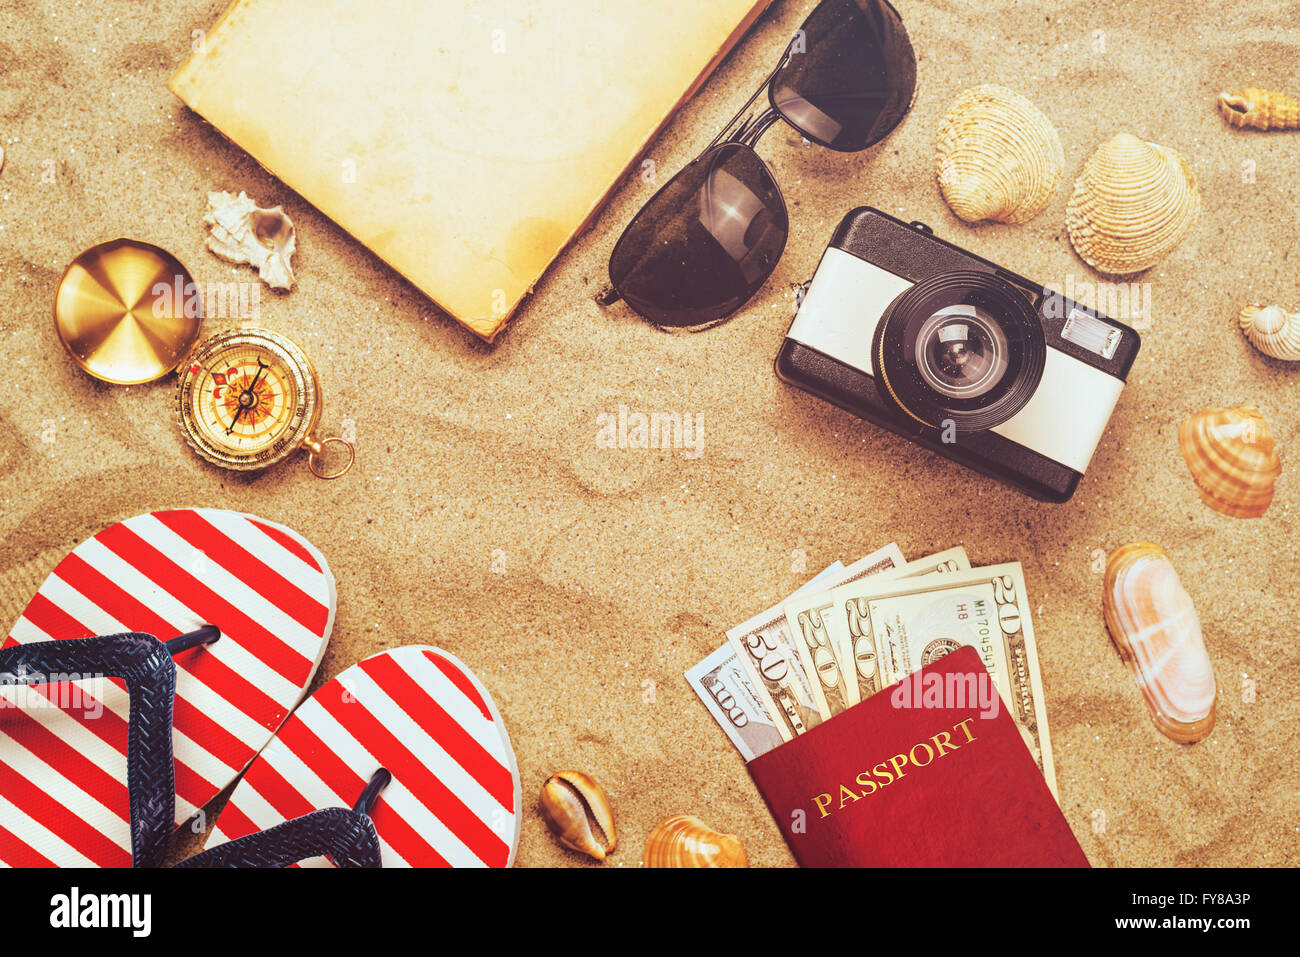 Summer vacation accessories on tropical sandy ocean beach, holidays abroad - summertime lifestyle objects and US American dollar Stock Photo